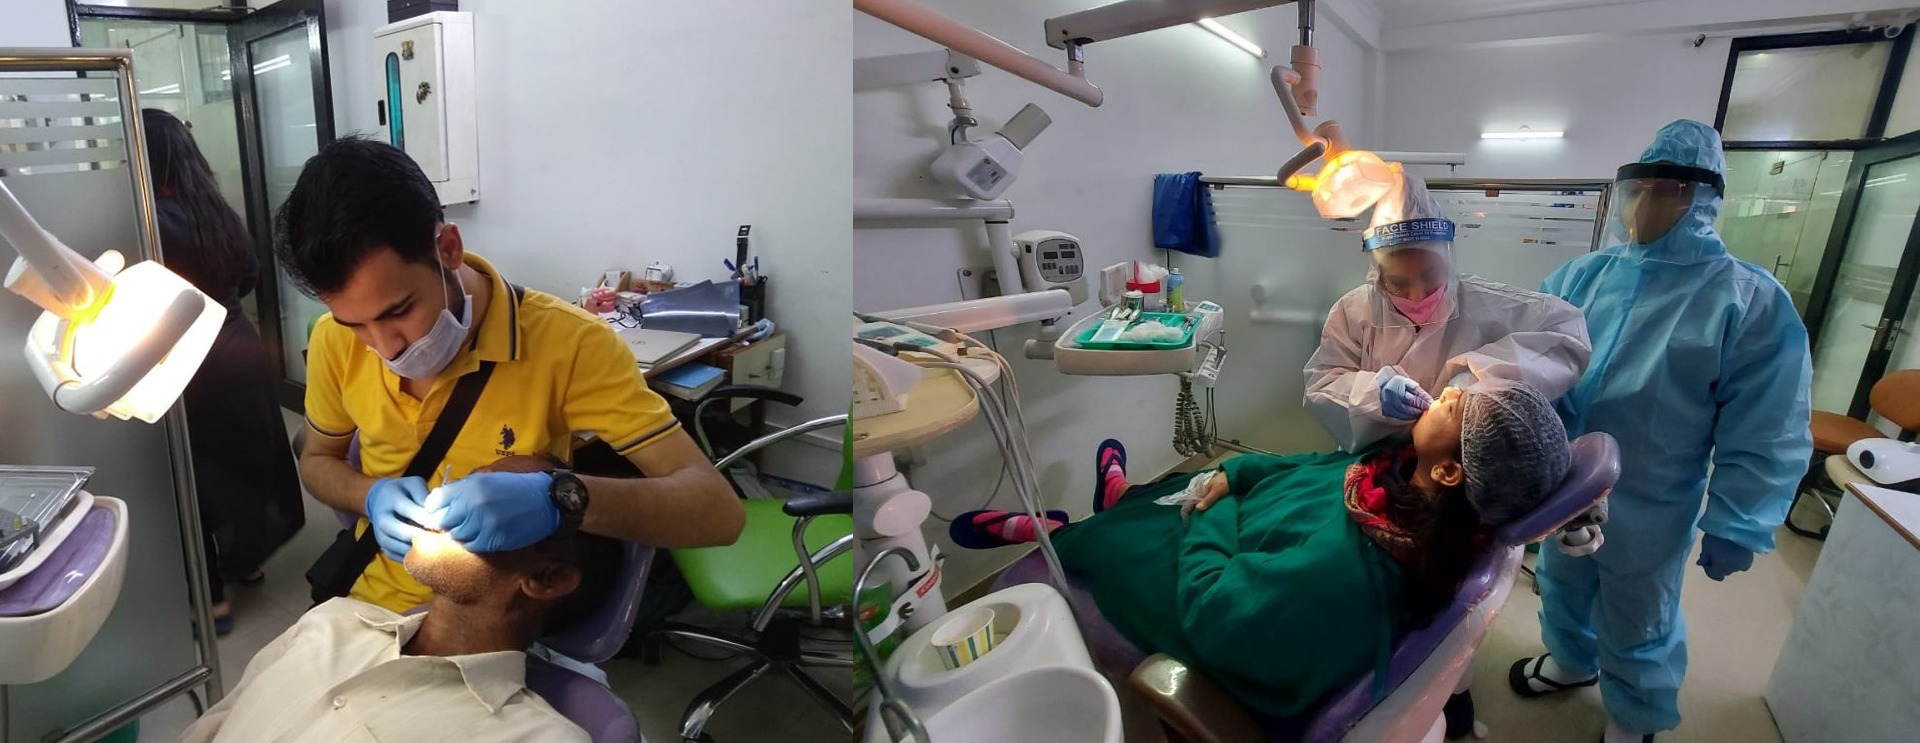 Our Dentist operating on cases